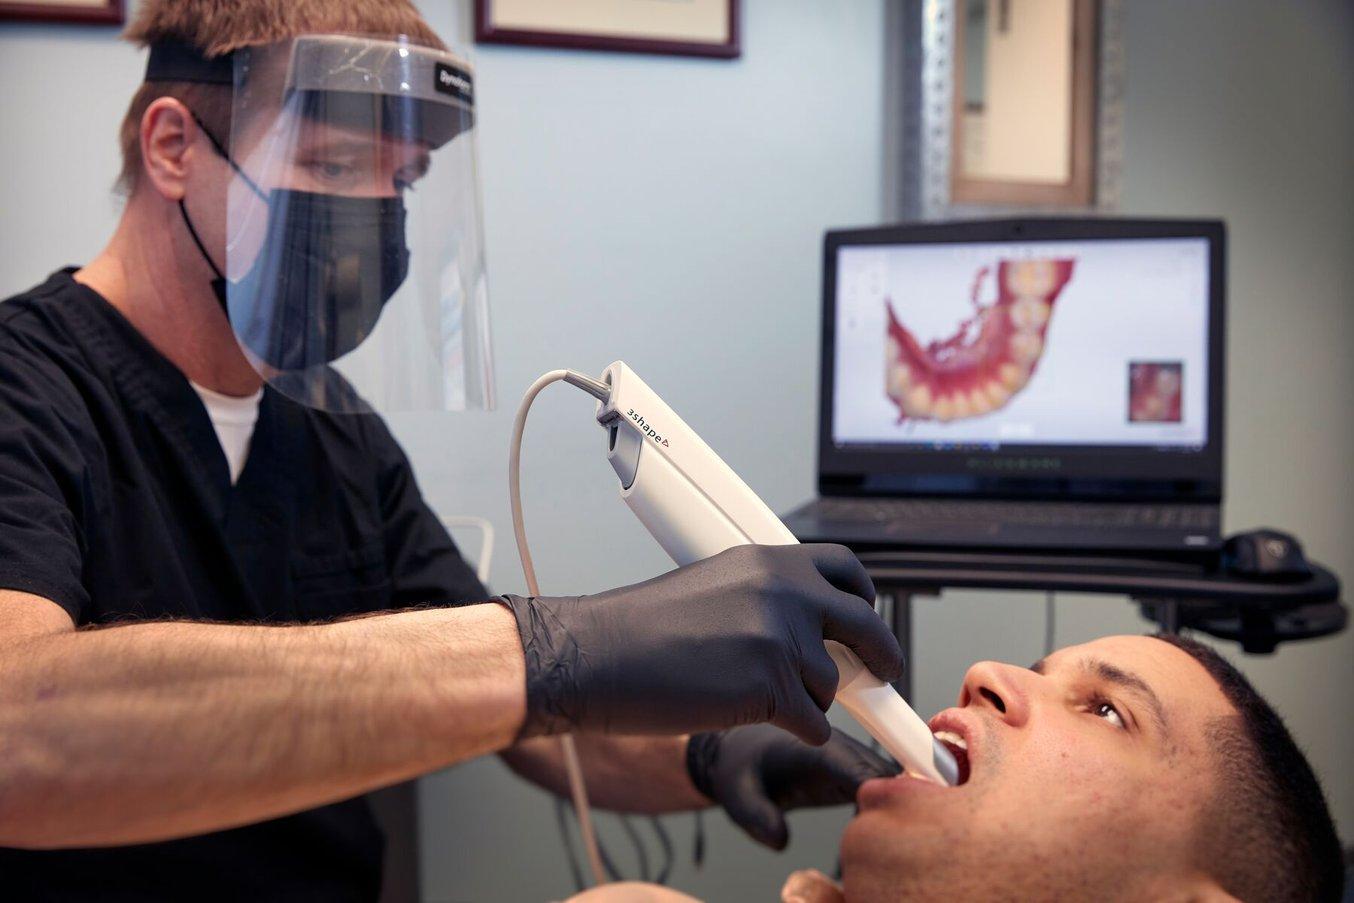 Dental professional using an intraoral scanner on a patient